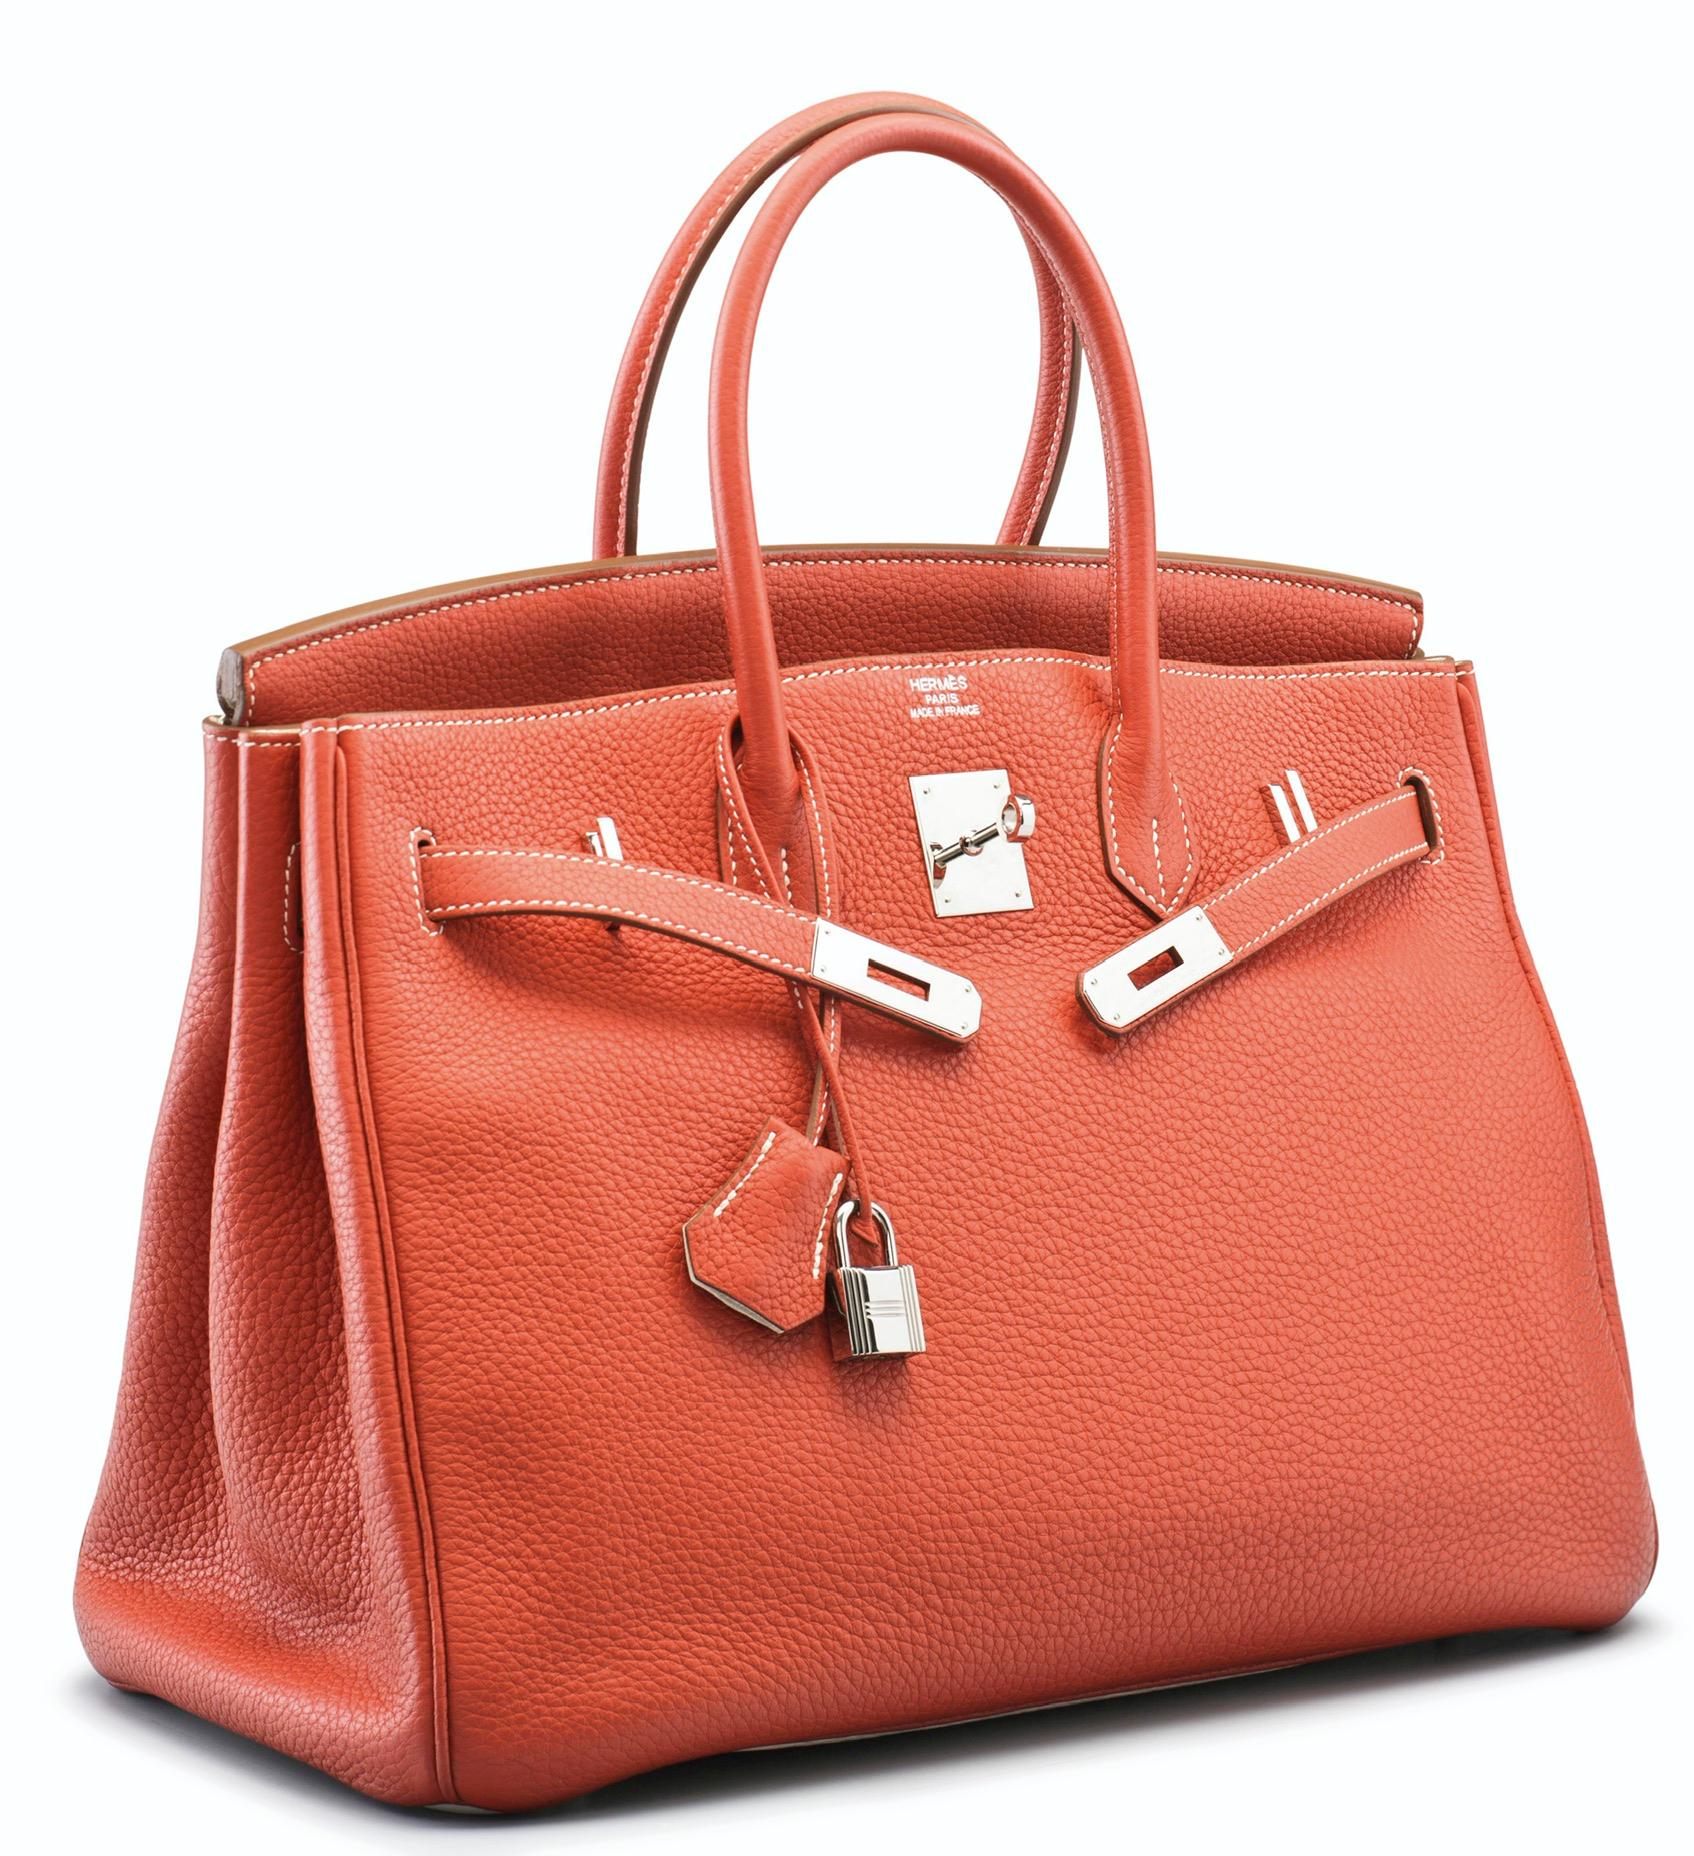 Hermesw Birkin 35 limited edition Sanguine and White with palladium hardware In Excellent Condition In London, England